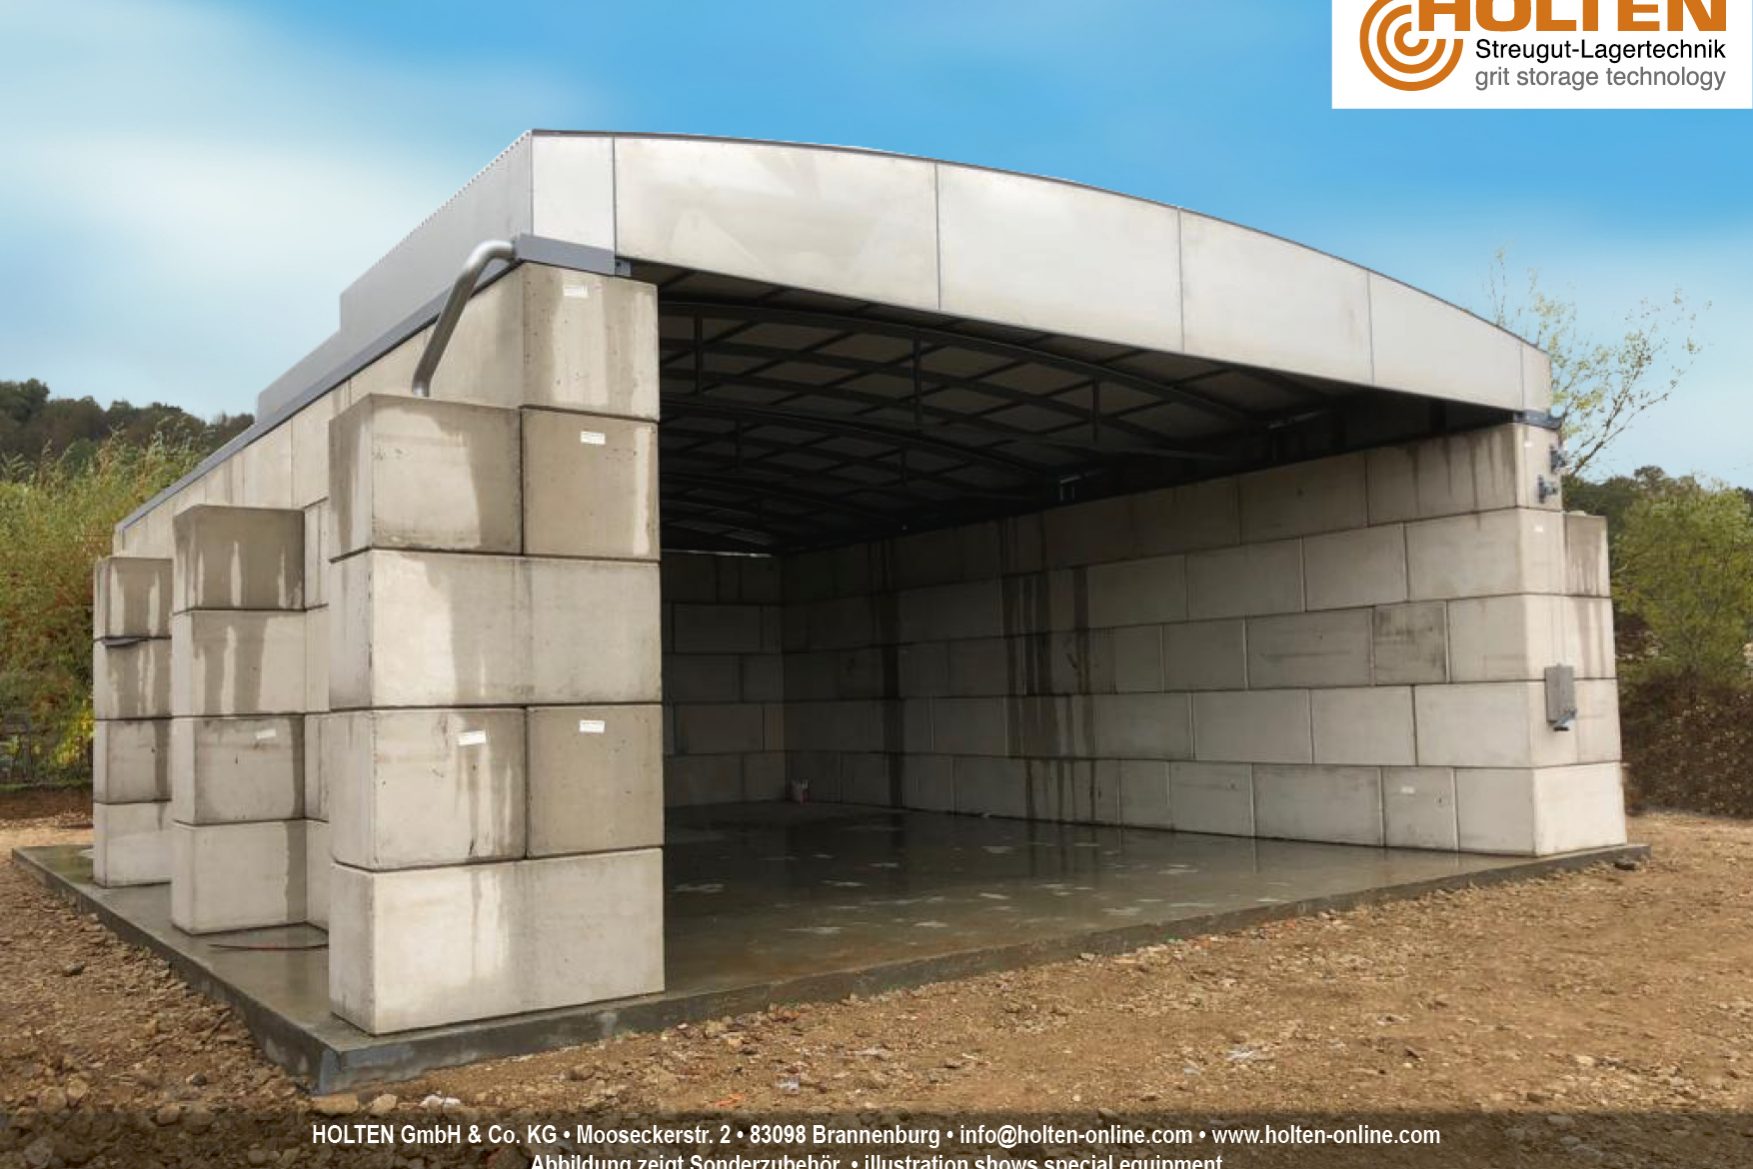 HOLTEN picuture concrete blocks with sliding roof 3 of 4